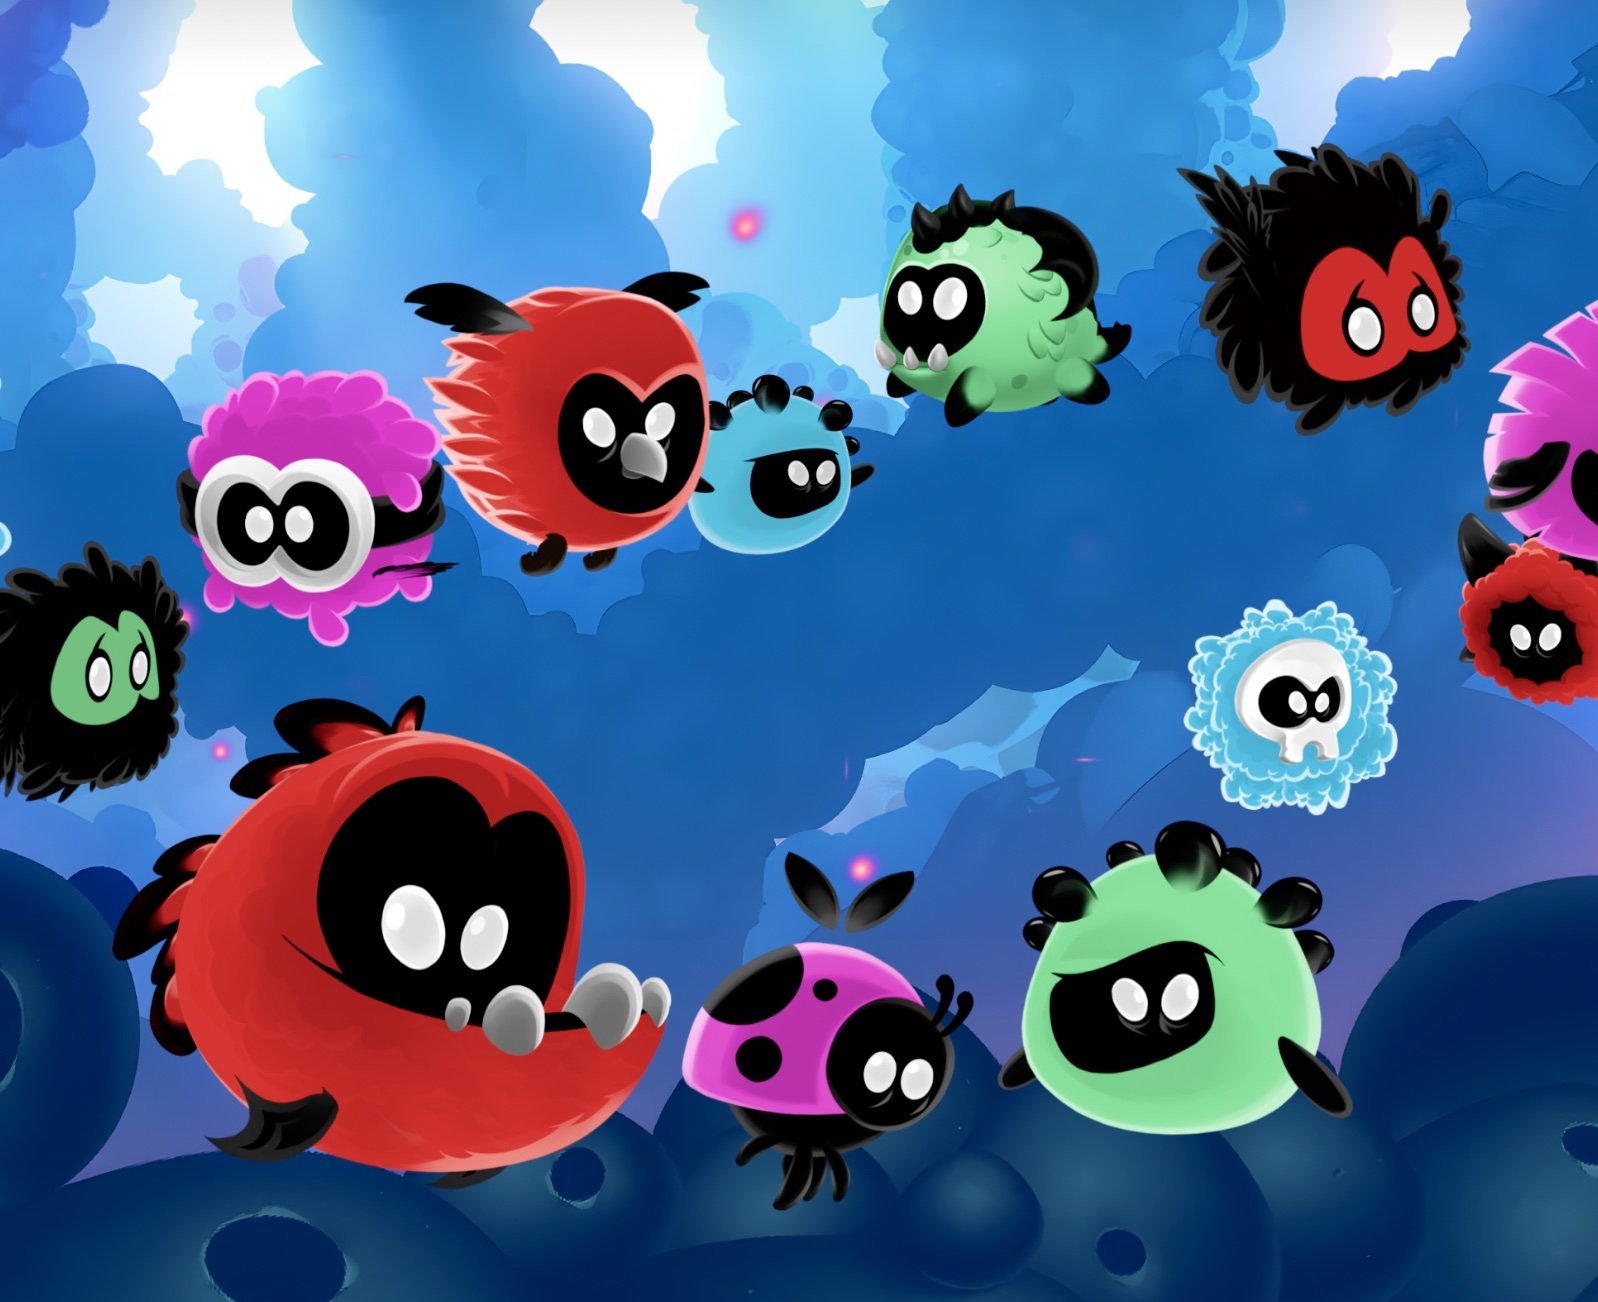 Download Badland Party for free from Apple Arcade today